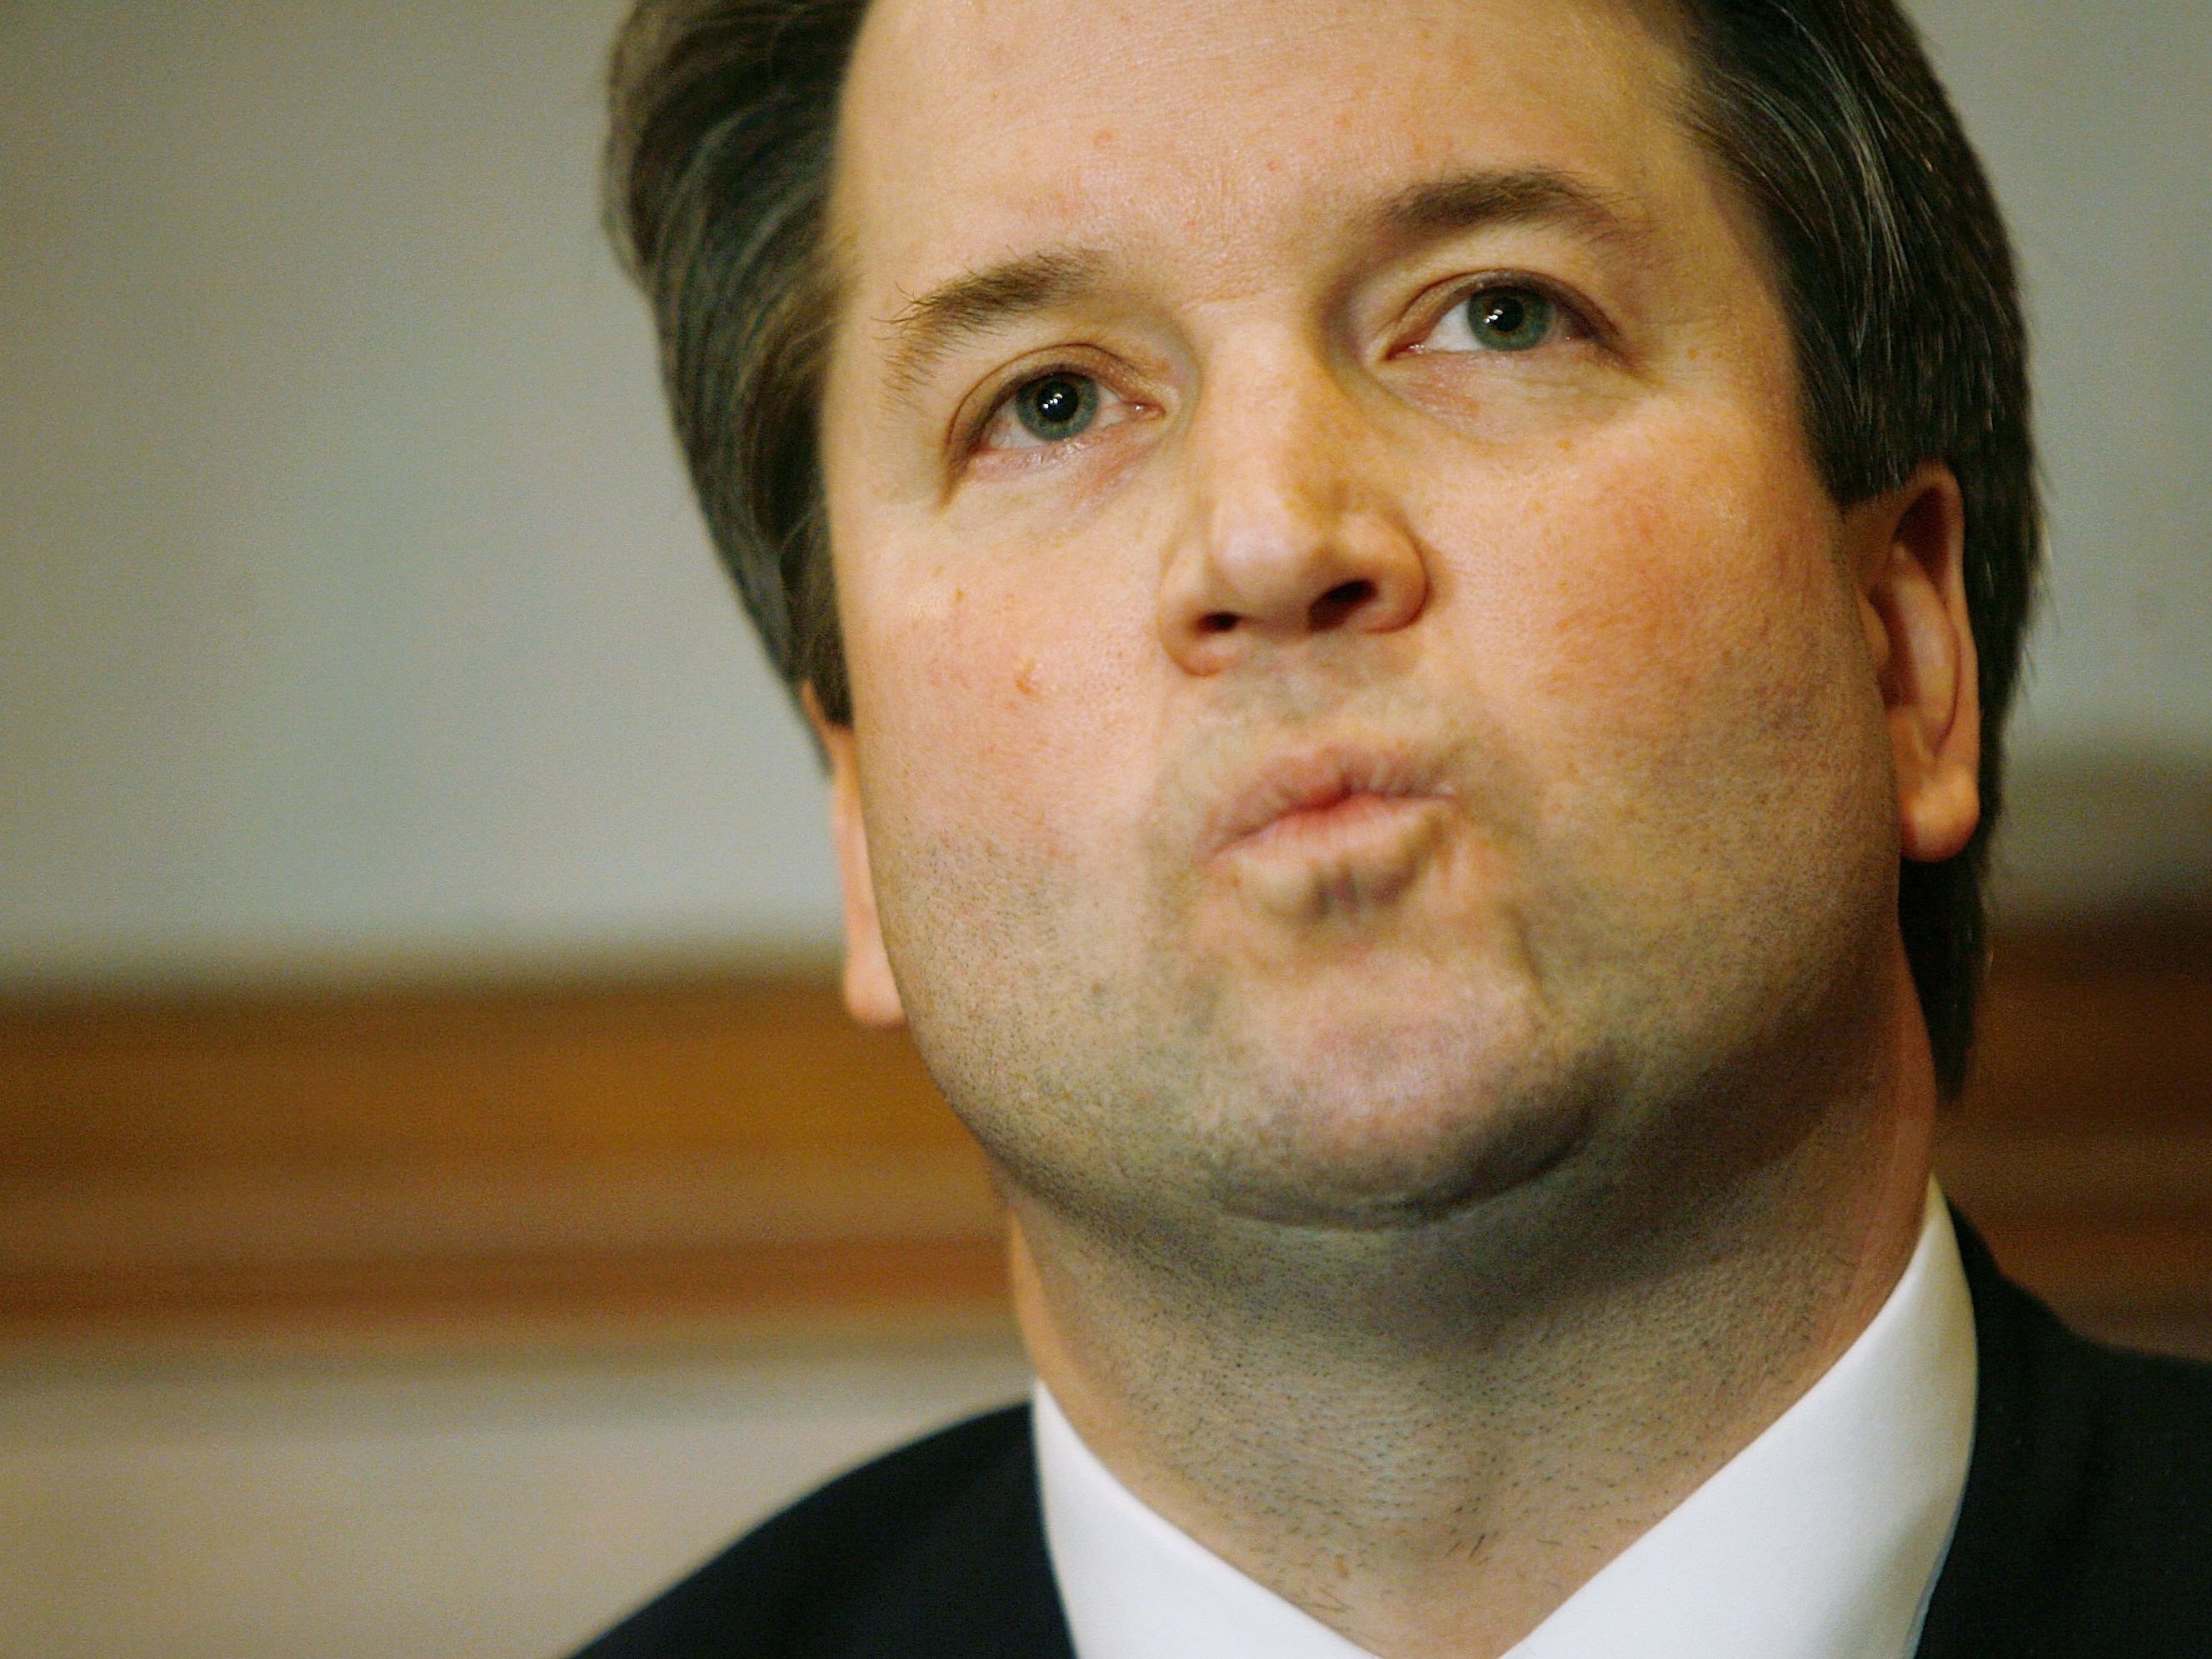 Brett Kavanaugh attends a news conference with Senate GOP leadership in the Capitol in 2006 during tense consideration of his appointment to the federal bench. (Photo by Chip Somodevilla/Getty Images)